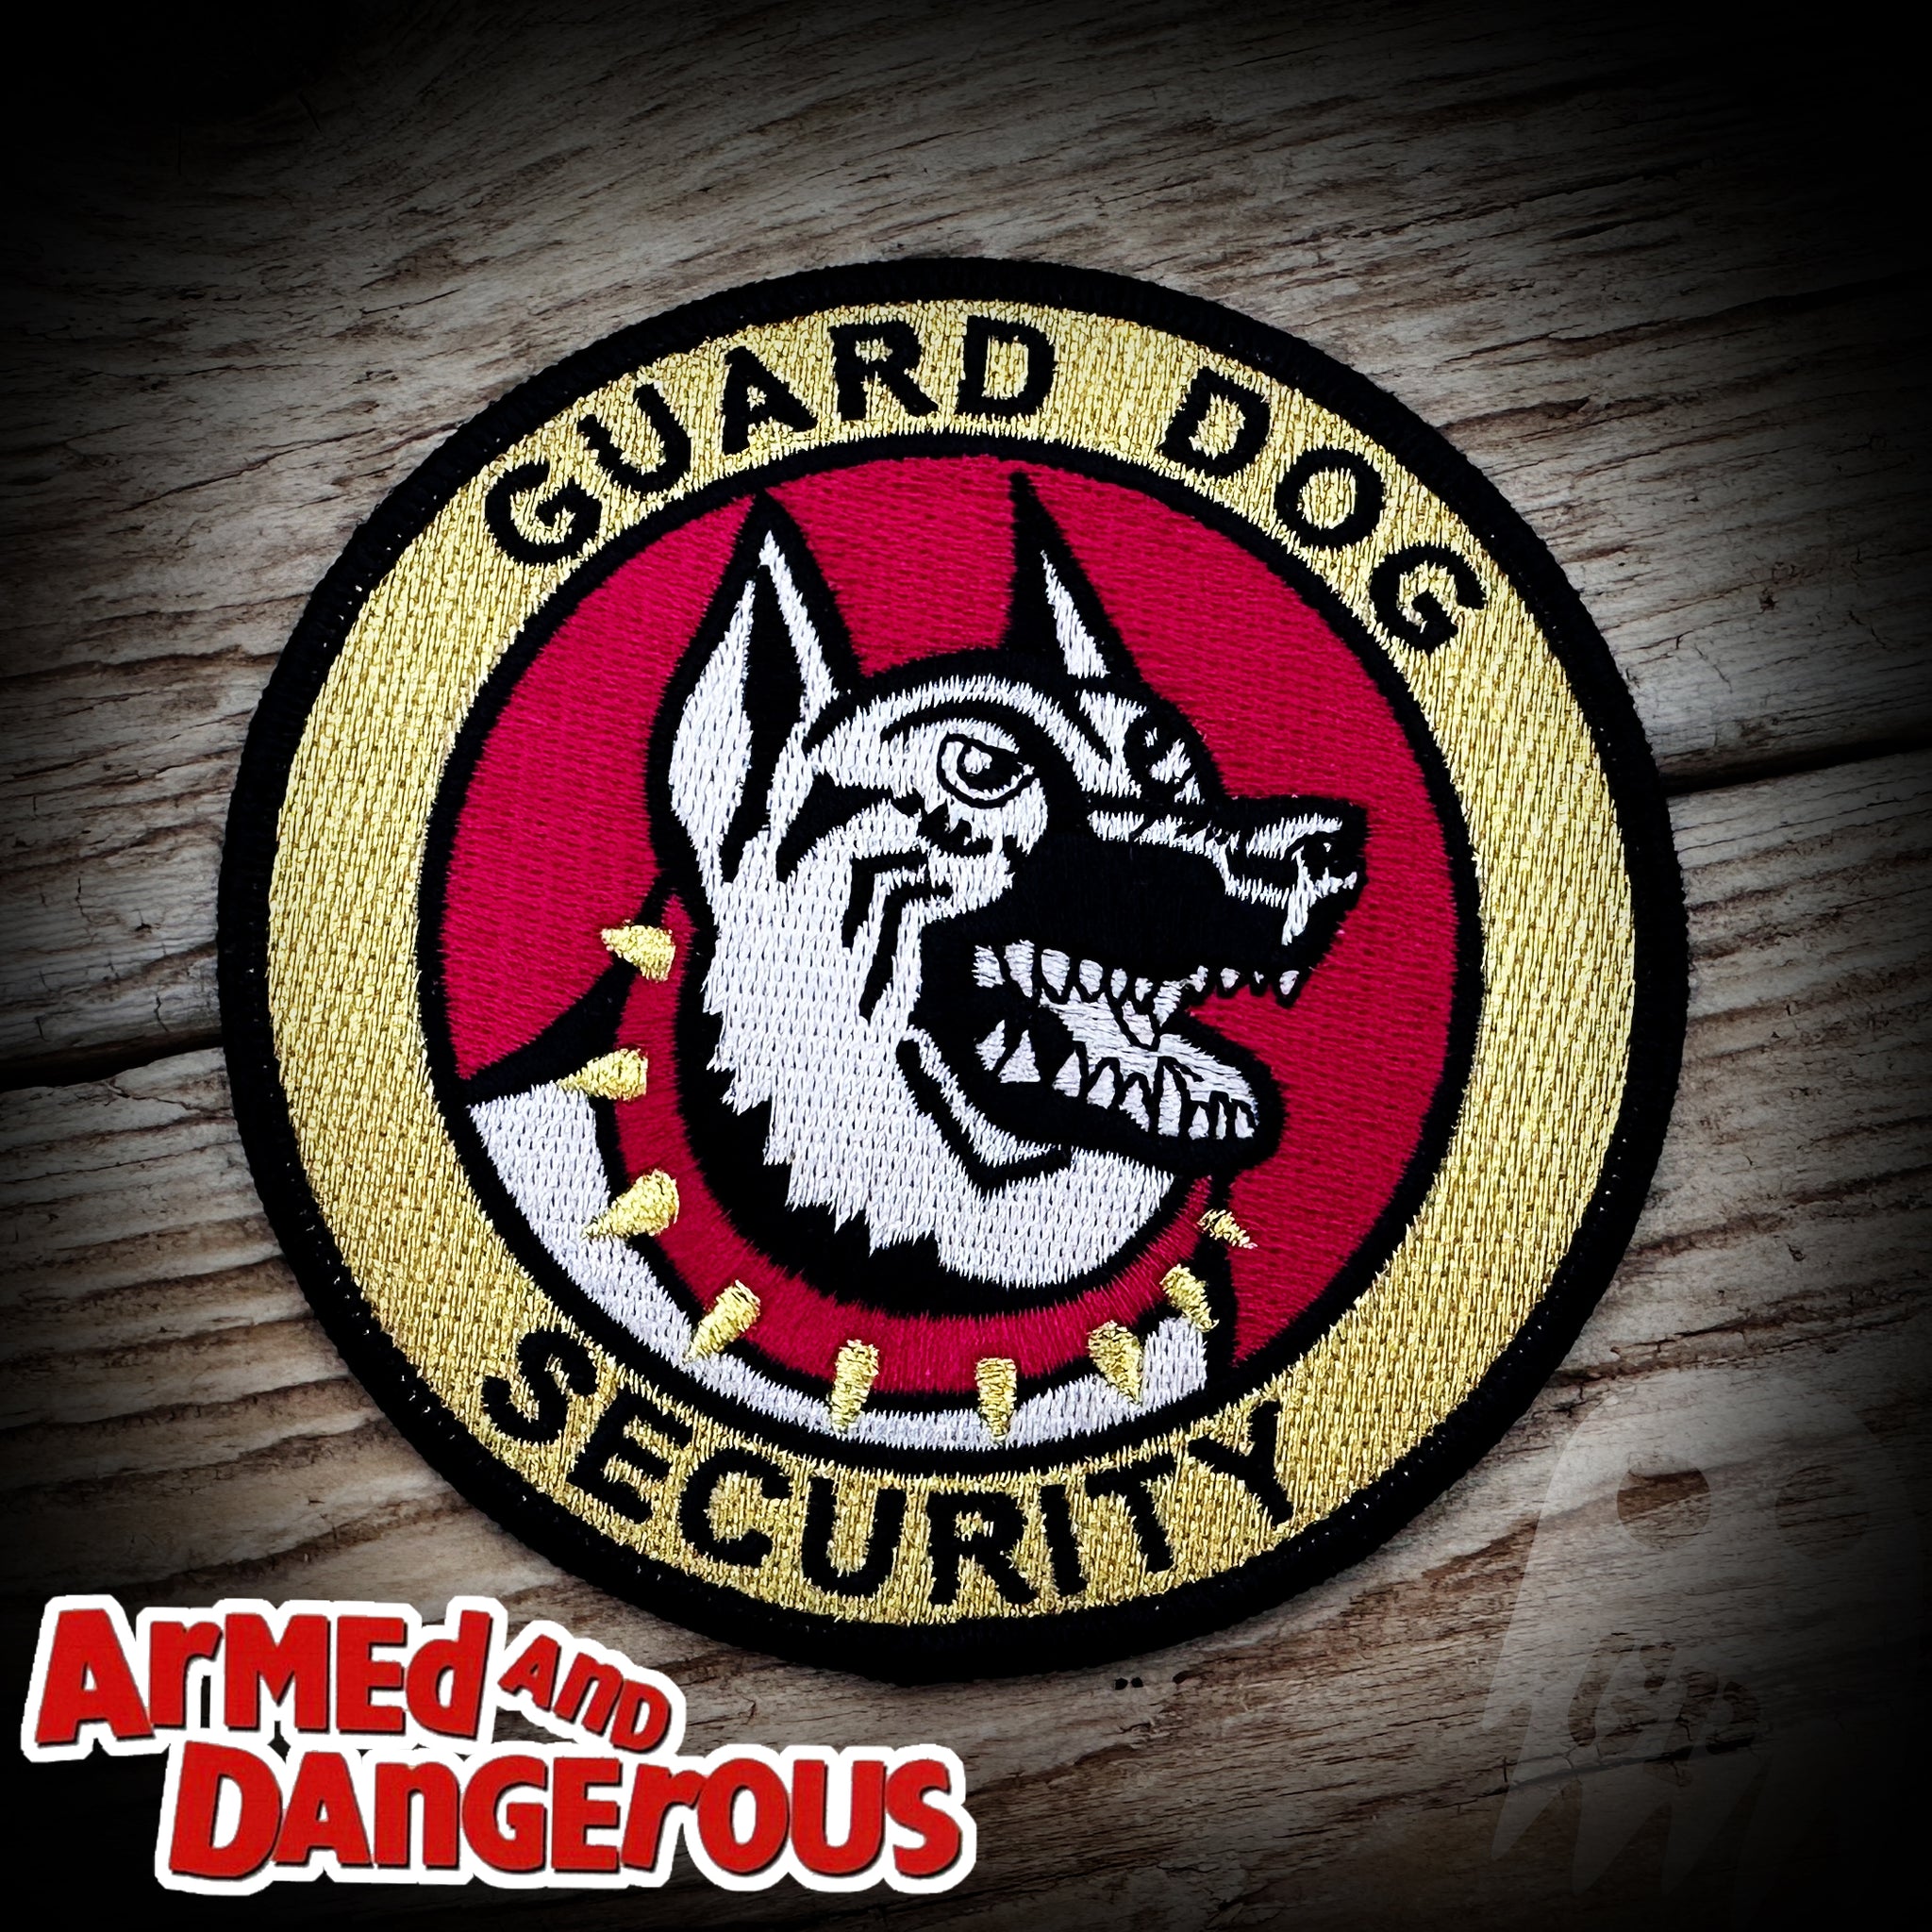 #94 - Guard Dog Security - Armed and Dangerous